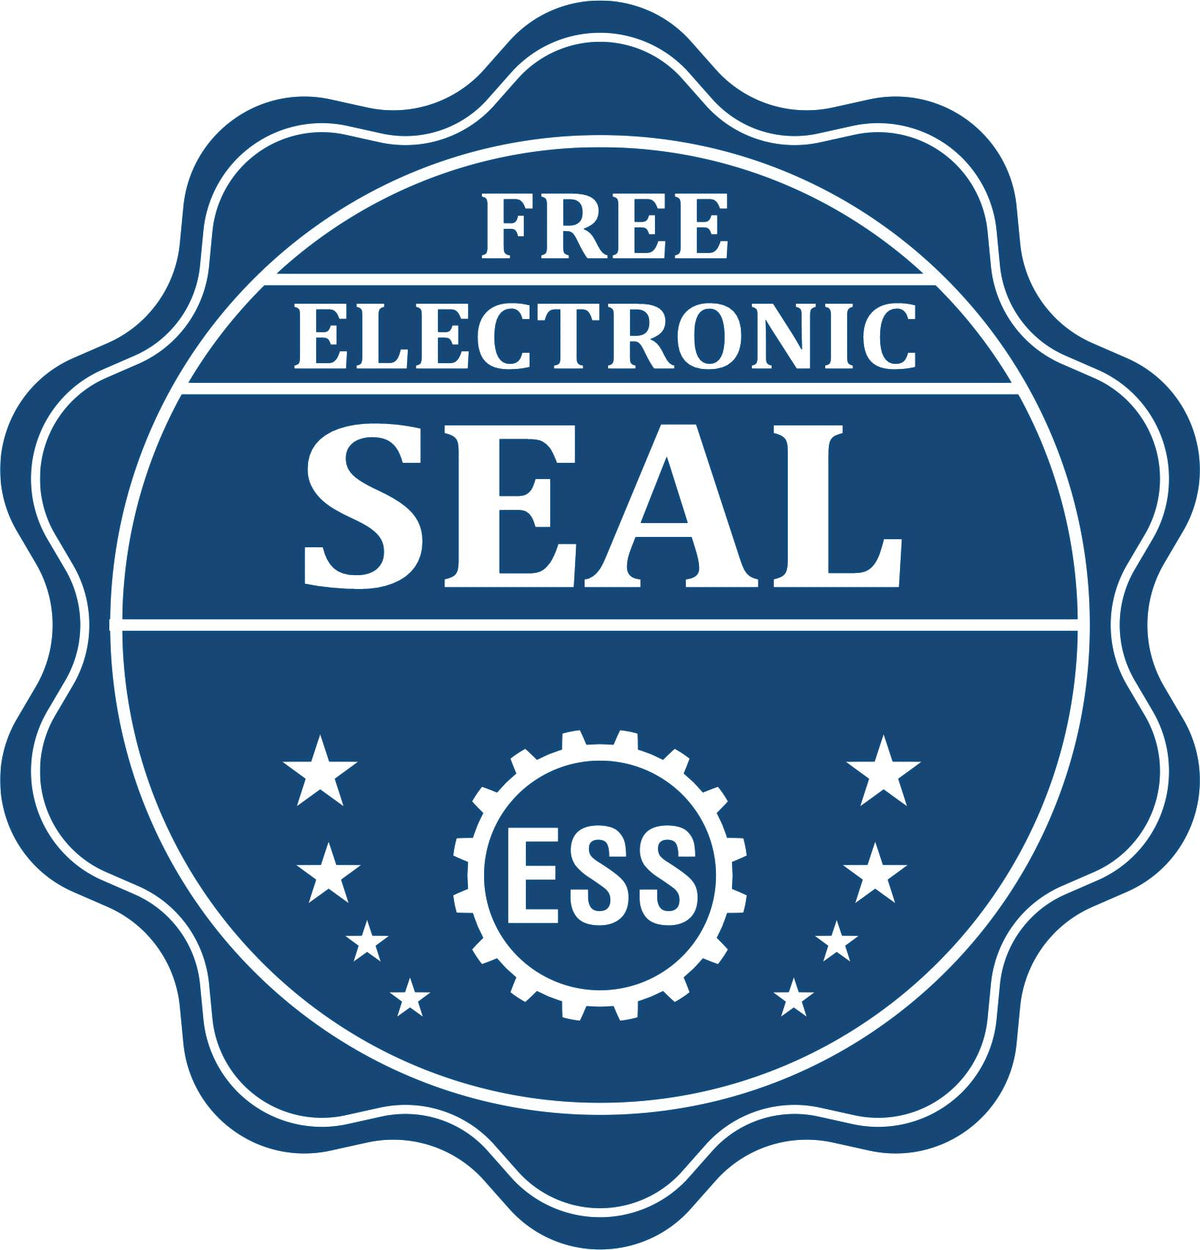 A badge showing a free electronic seal for the Hybrid Georgia Geologist Seal with stars and the ESS gear on the emblem.